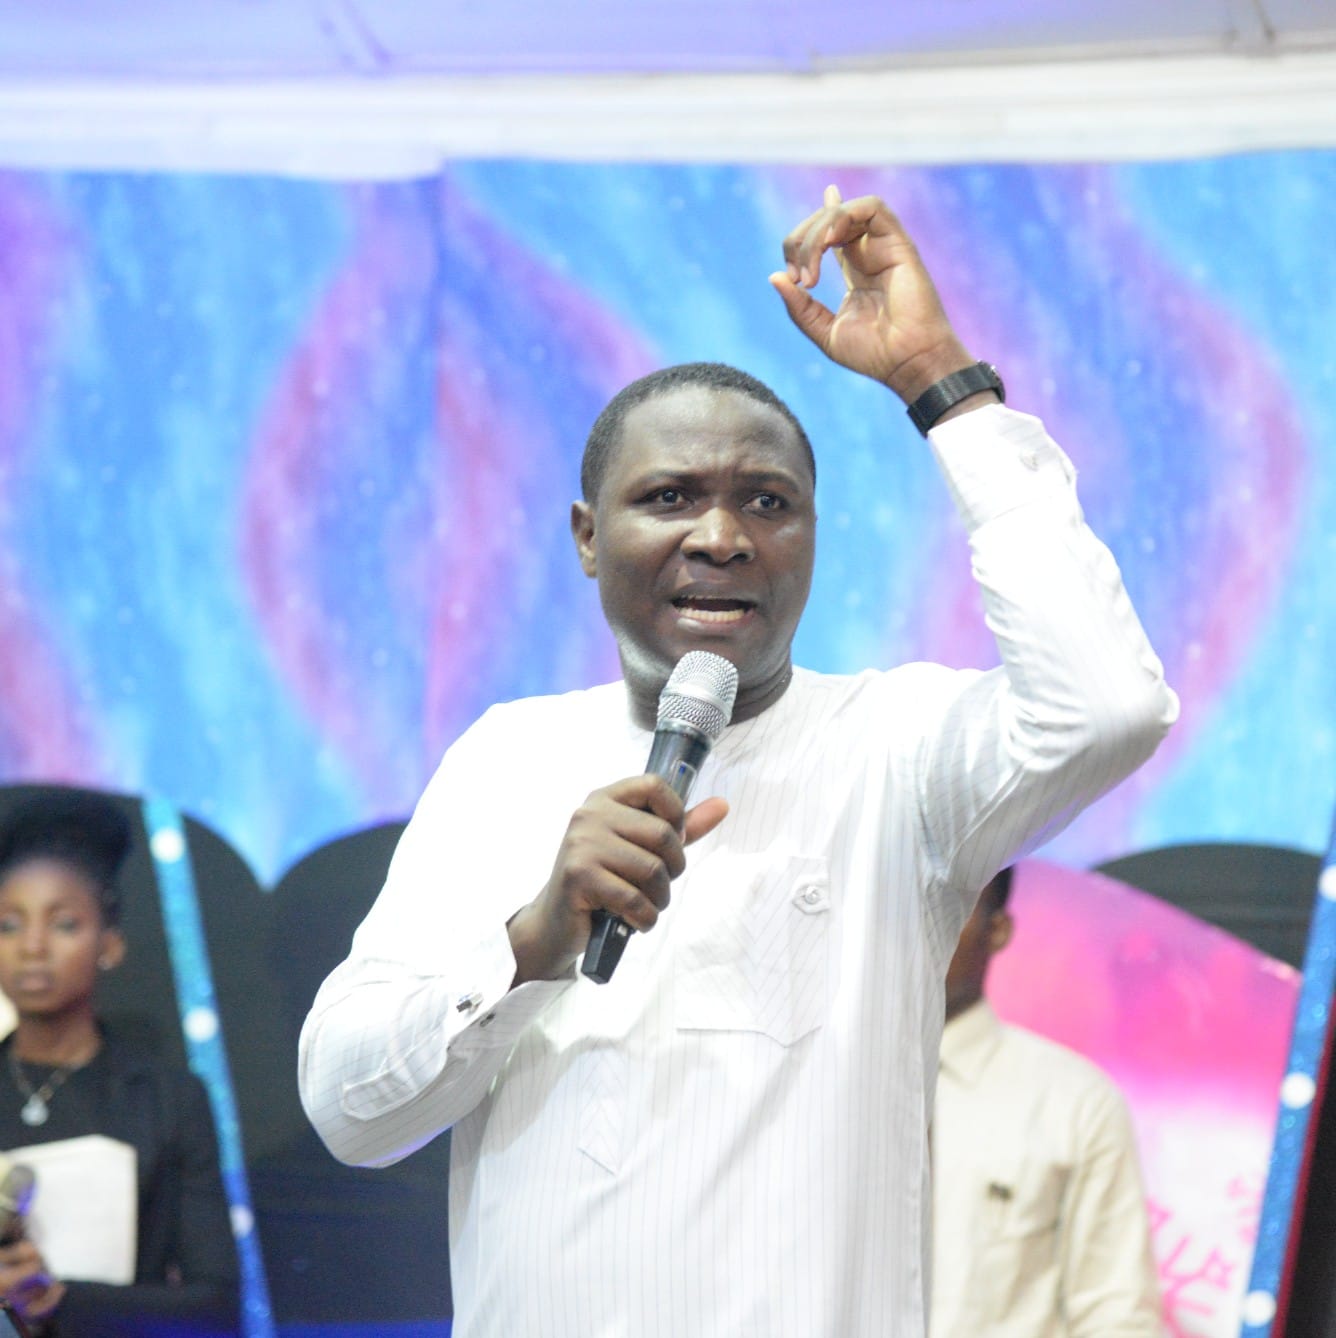 DOWNLOAD MP3: THE MYSTERY OF DIVINE HELP by Apostle Jonathan Shekwonya (Sermon) 1